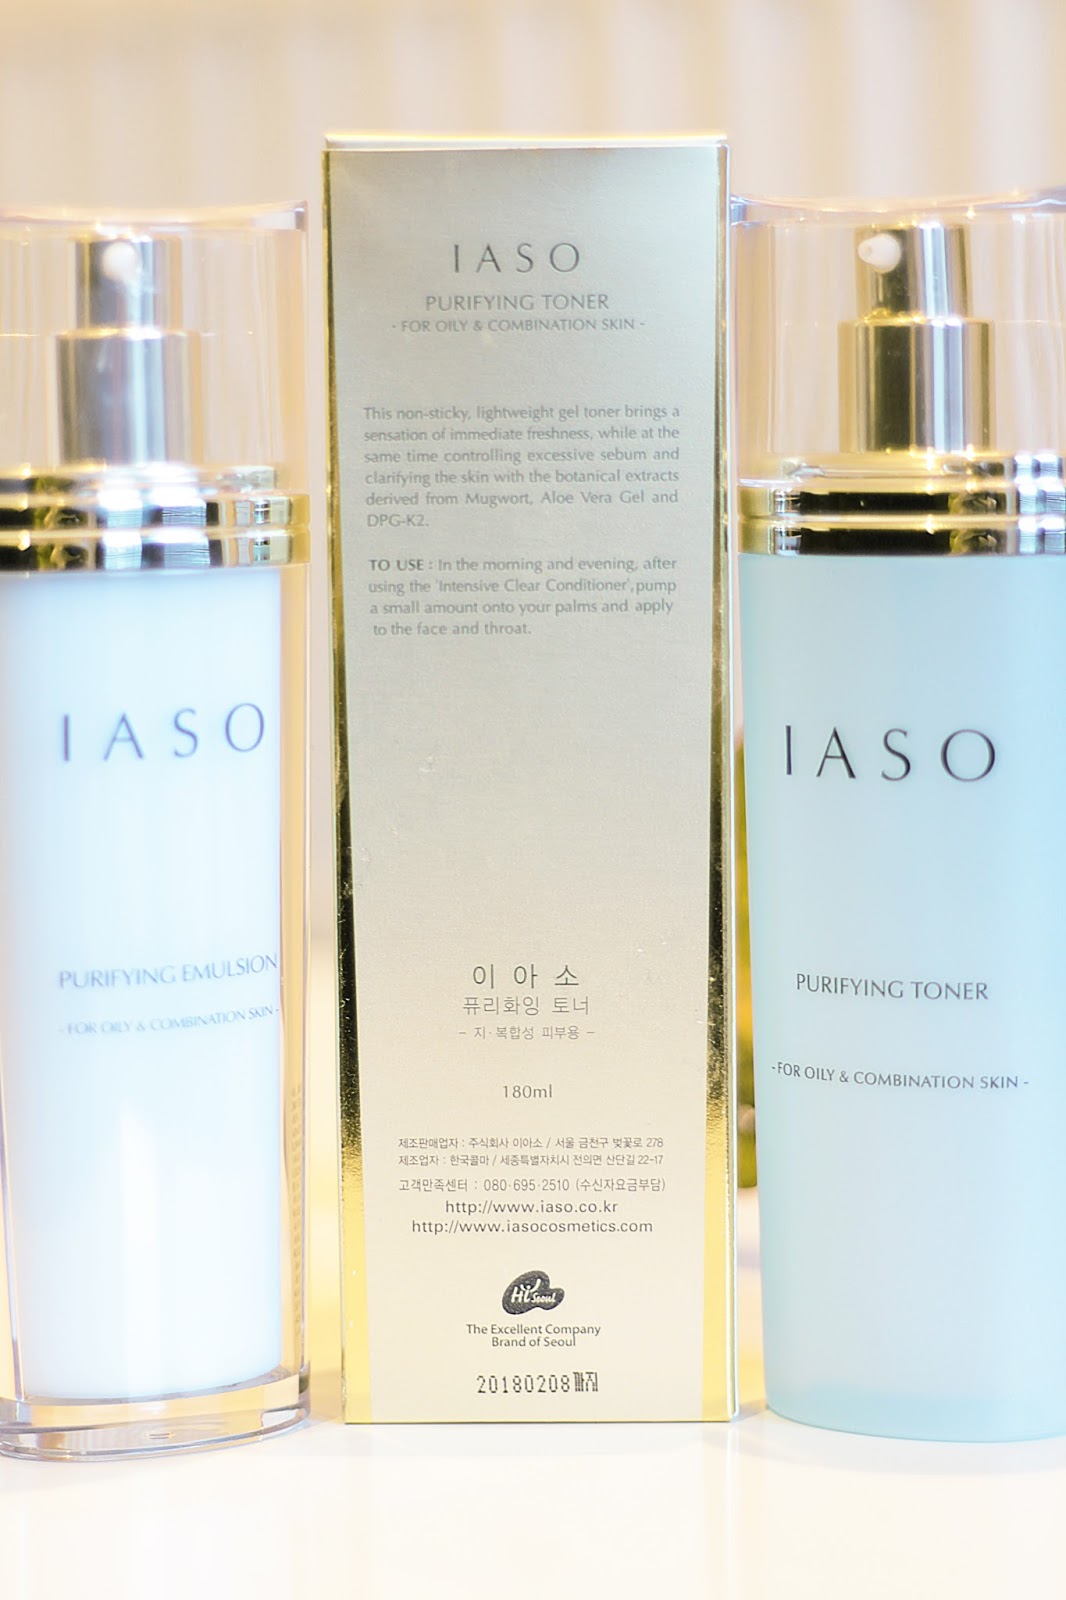 IASO korean skincare brand - review of their purifying toner and purifying emulsion